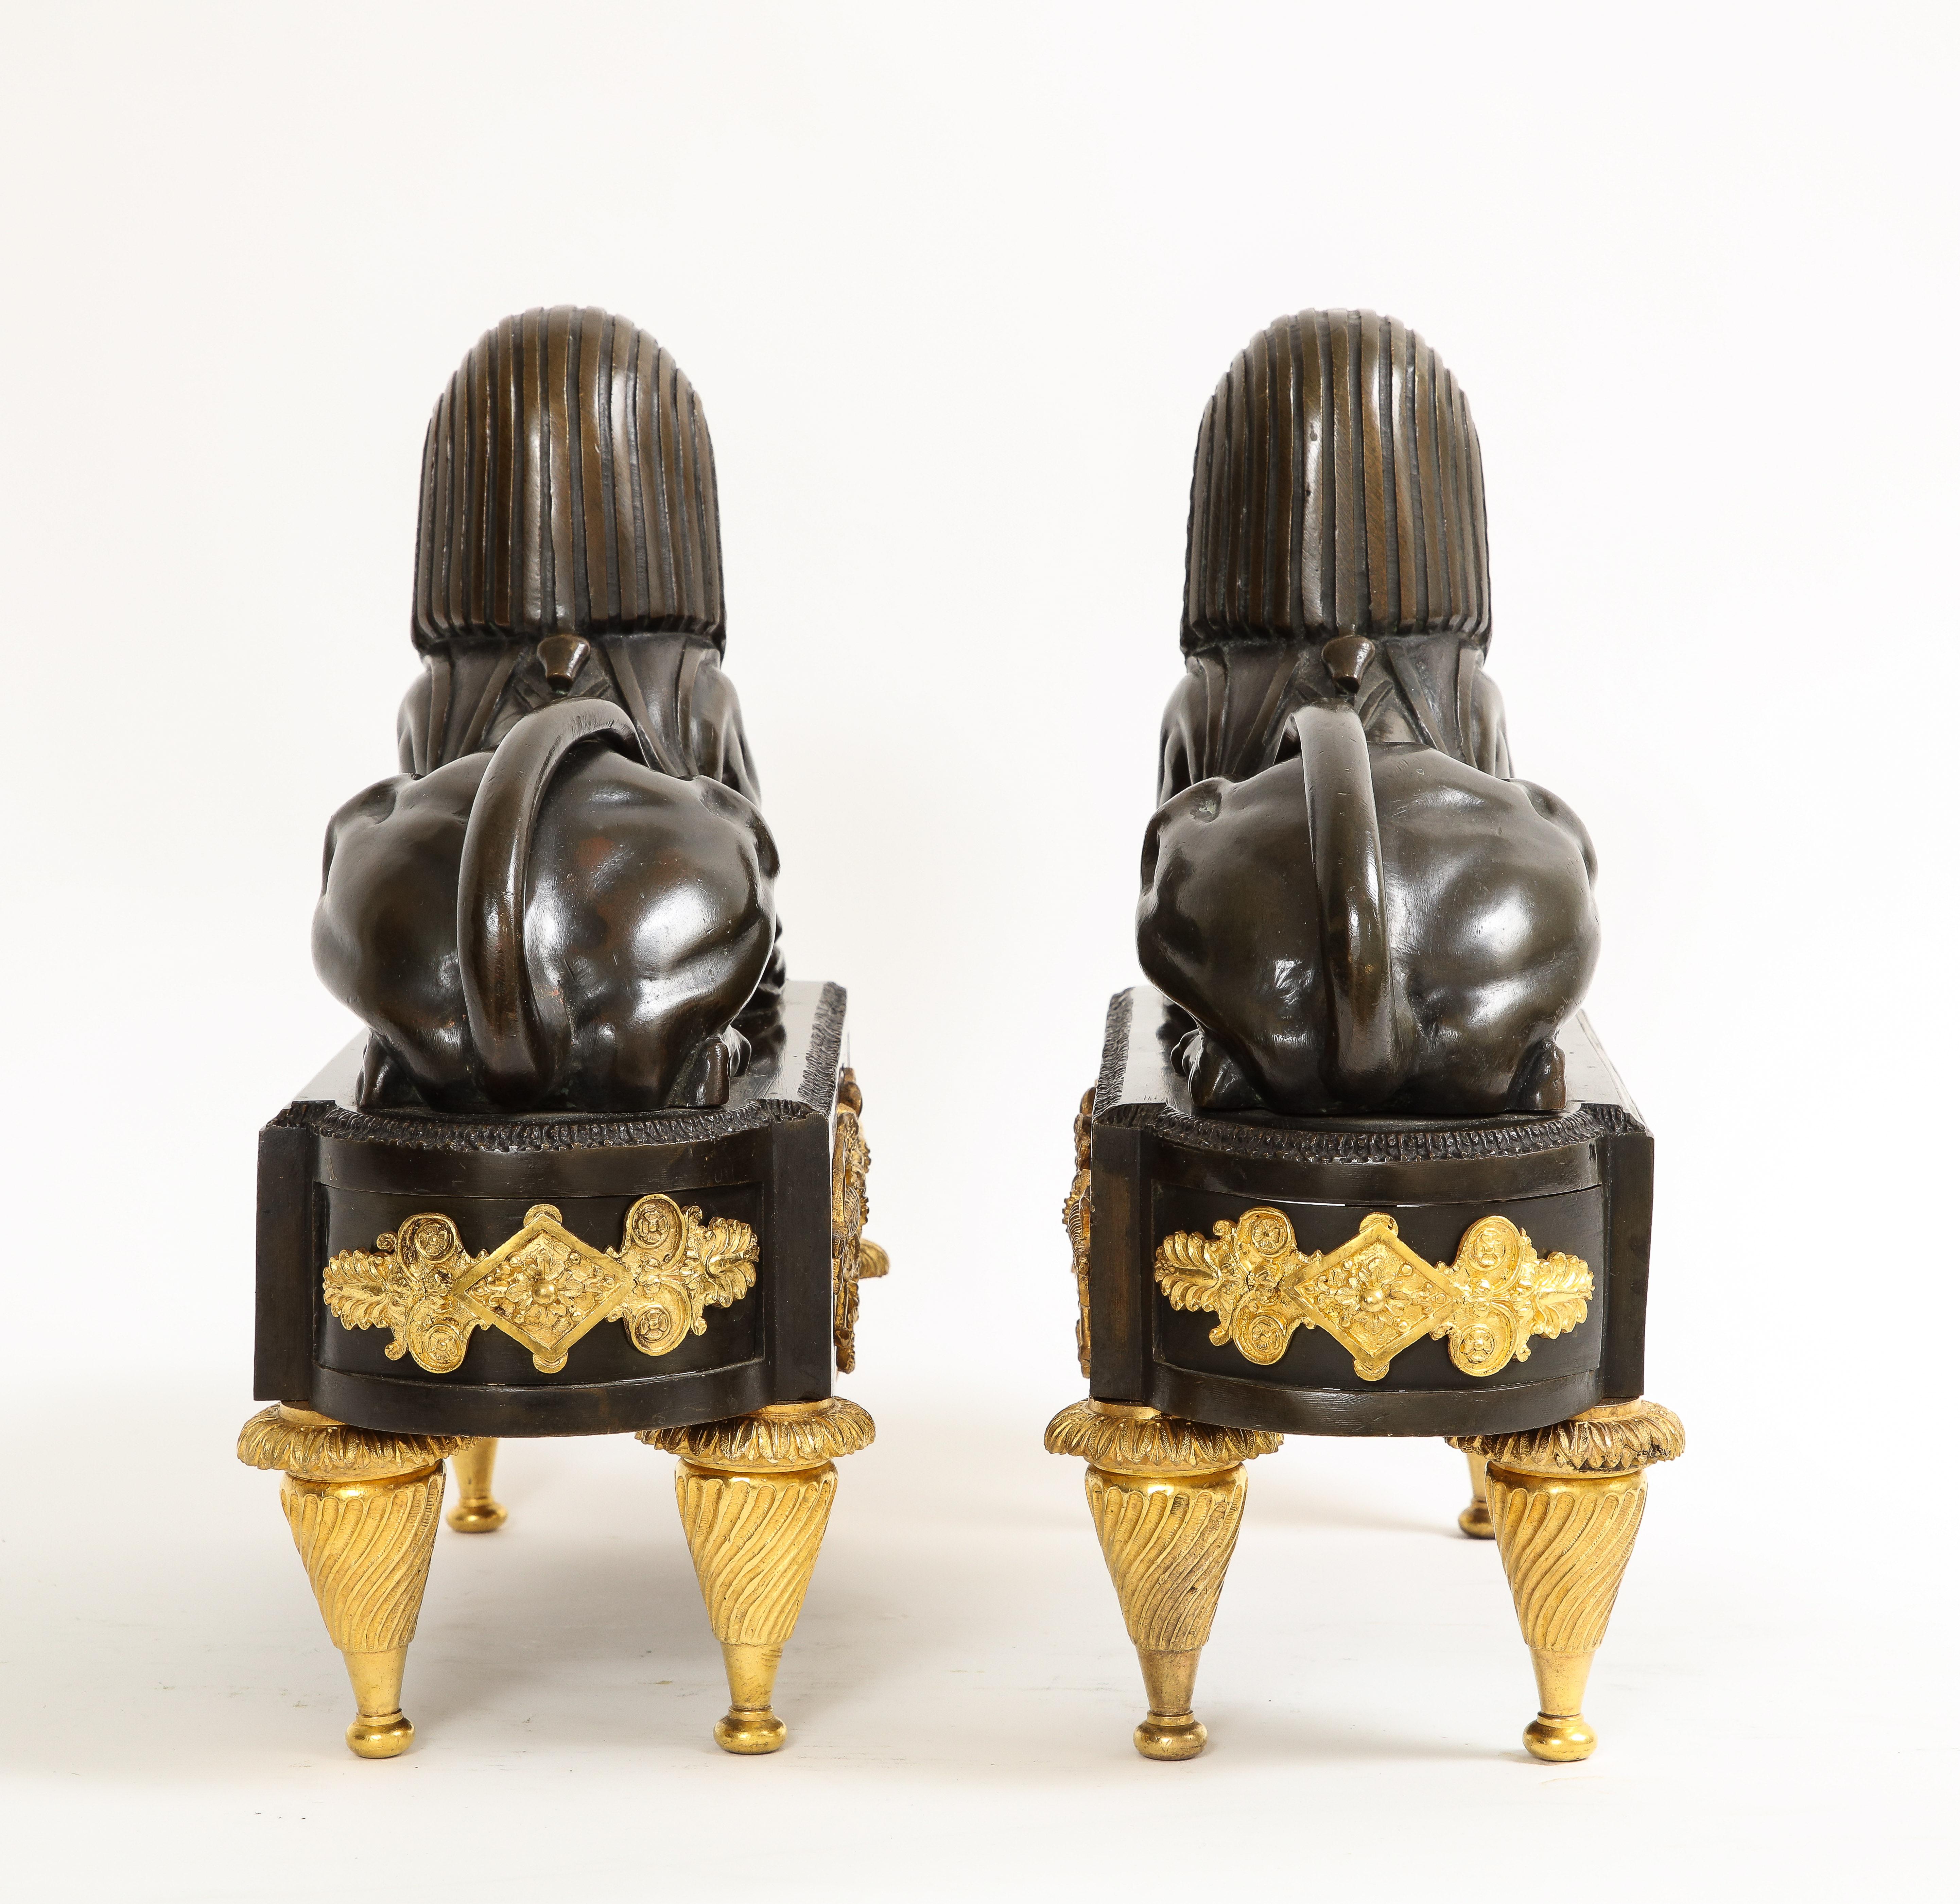 Pair of French Early 19th C. Patinated and Dore Bronze Egyptian Revival Chenets For Sale 3